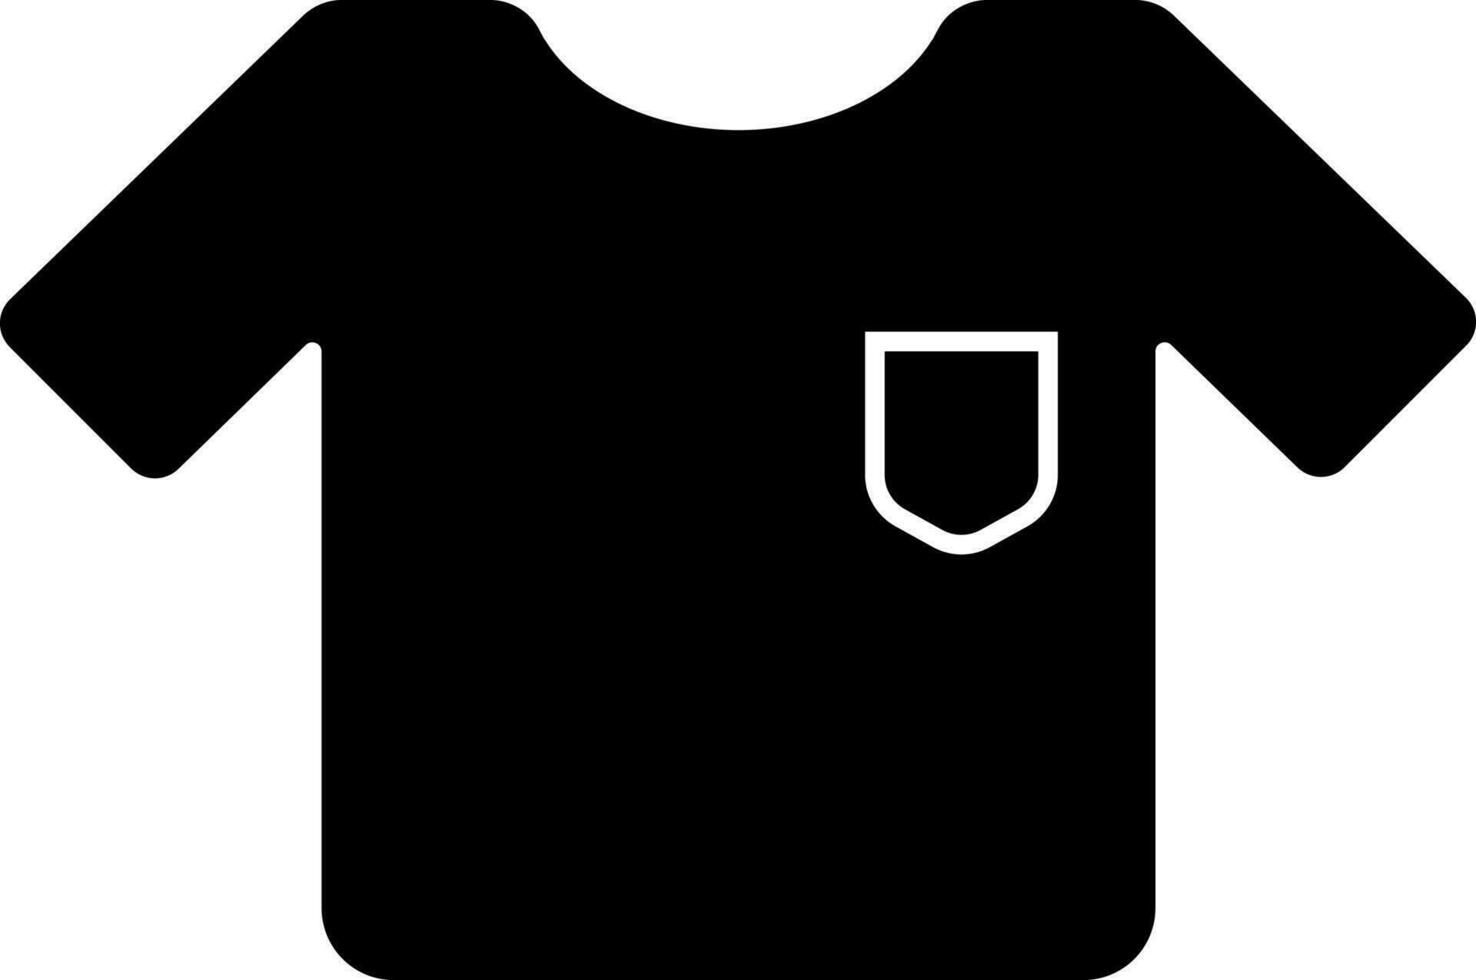 Black and White t shirt in flat style. Glyph icon or symbol. vector